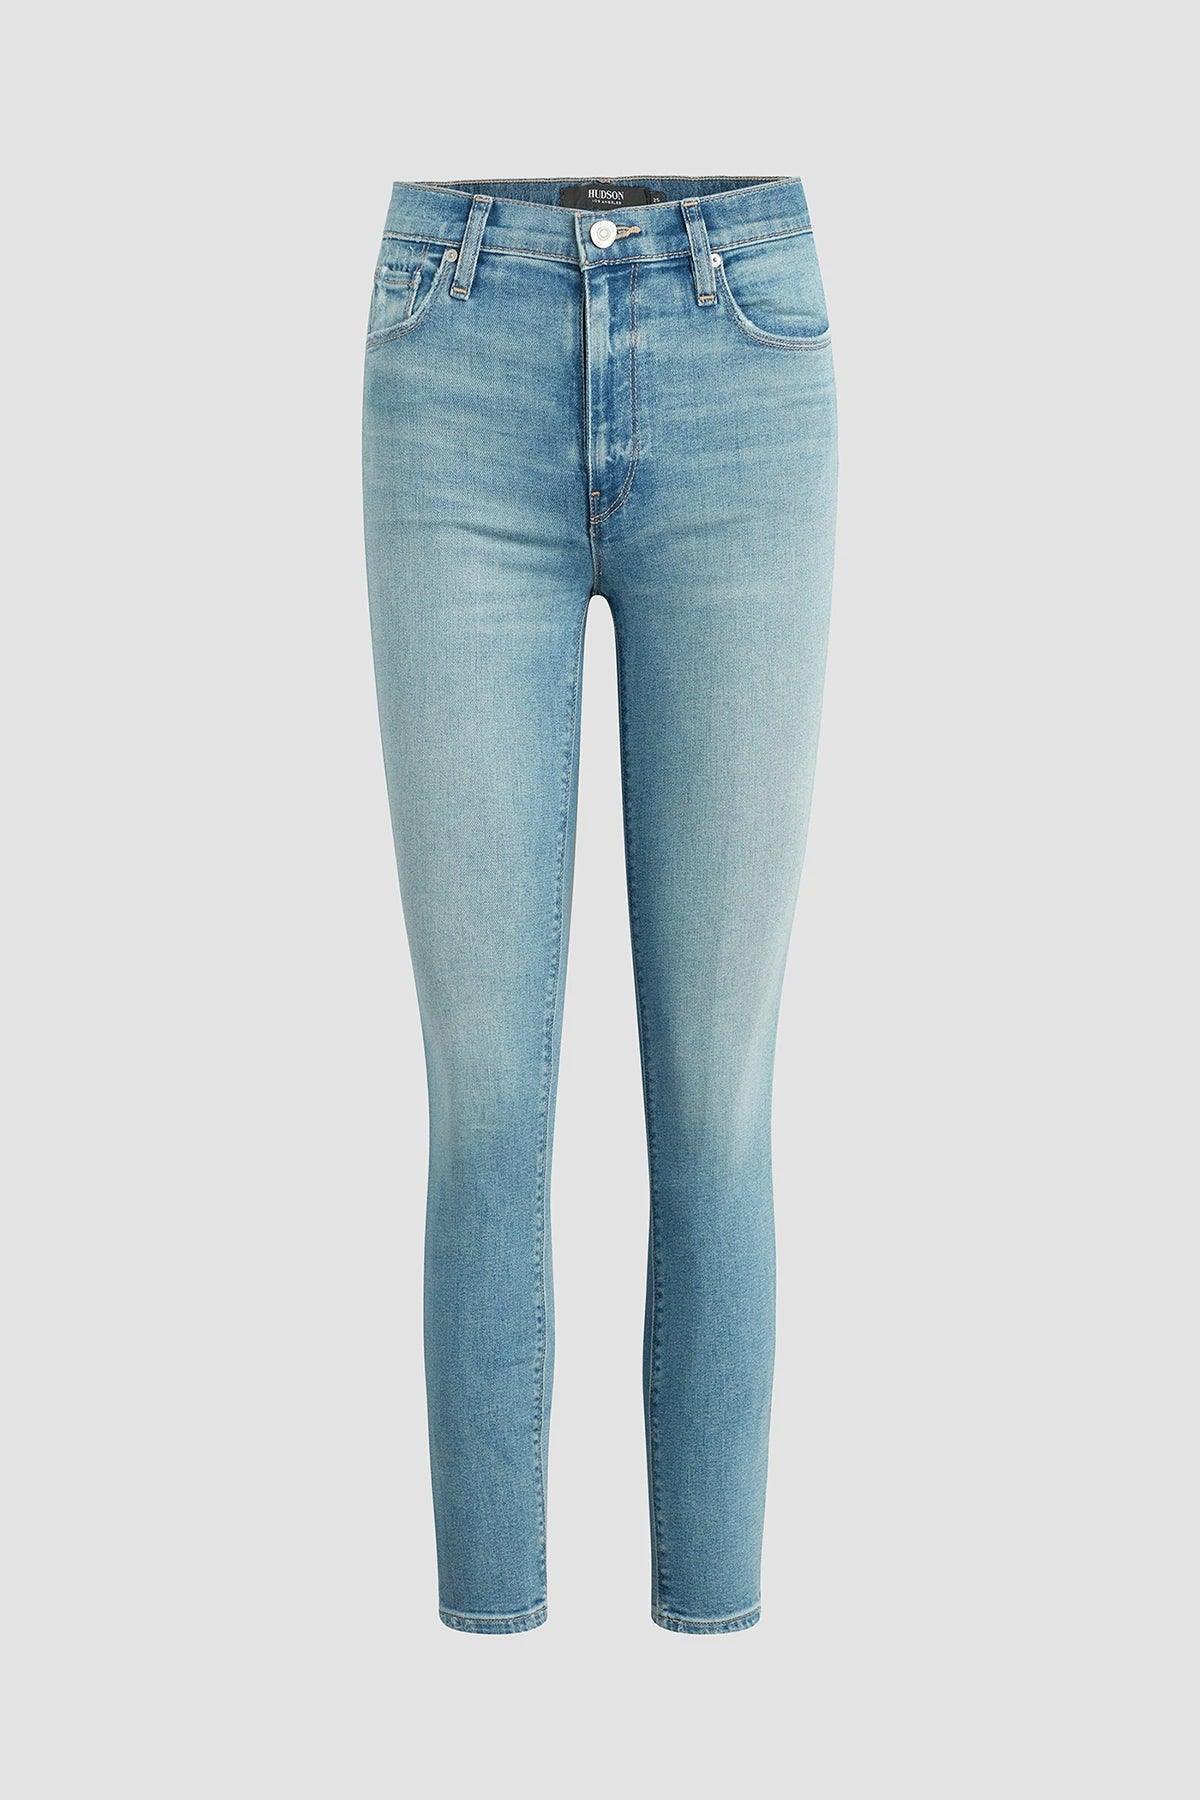 Barbara High Rise Super Skinny Ankle Jeans by Hudson - Haven